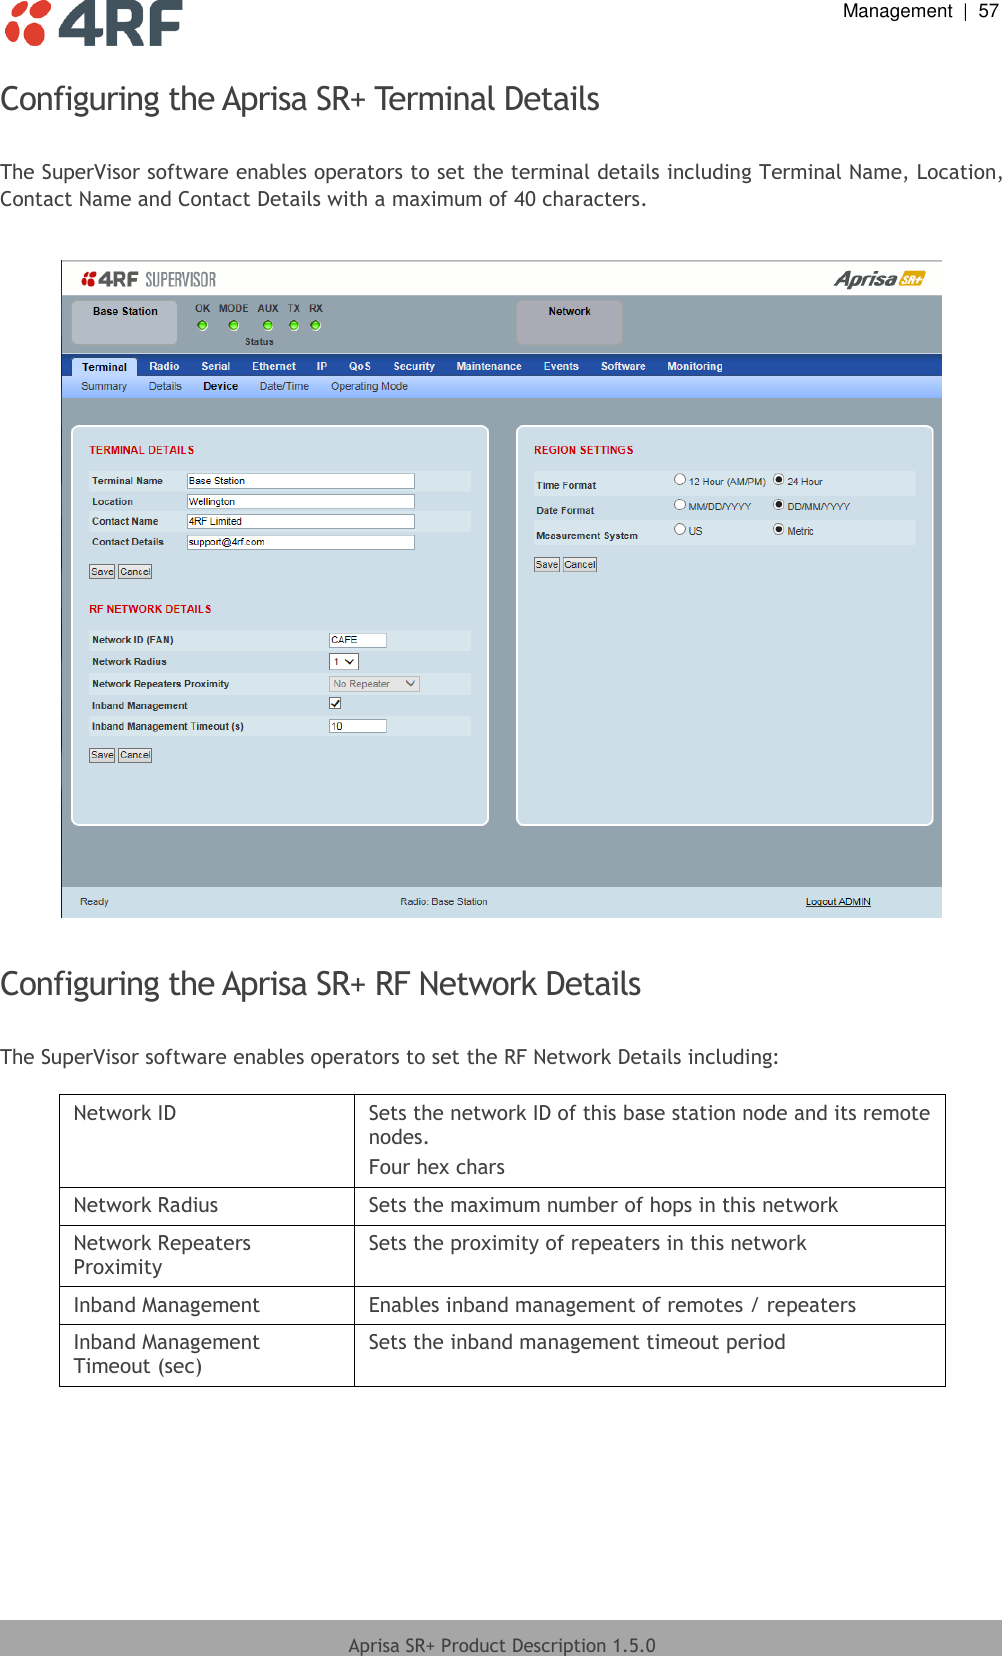  Management  |  57  Aprisa SR+ Product Description 1.5.0  Configuring the Aprisa SR+ Terminal Details  The SuperVisor software enables operators to set the terminal details including Terminal Name, Location, Contact Name and Contact Details with a maximum of 40 characters.    Configuring the Aprisa SR+ RF Network Details  The SuperVisor software enables operators to set the RF Network Details including:  Network ID Sets the network ID of this base station node and its remote nodes. Four hex chars Network Radius Sets the maximum number of hops in this network Network Repeaters Proximity Sets the proximity of repeaters in this network Inband Management Enables inband management of remotes / repeaters Inband Management Timeout (sec) Sets the inband management timeout period  